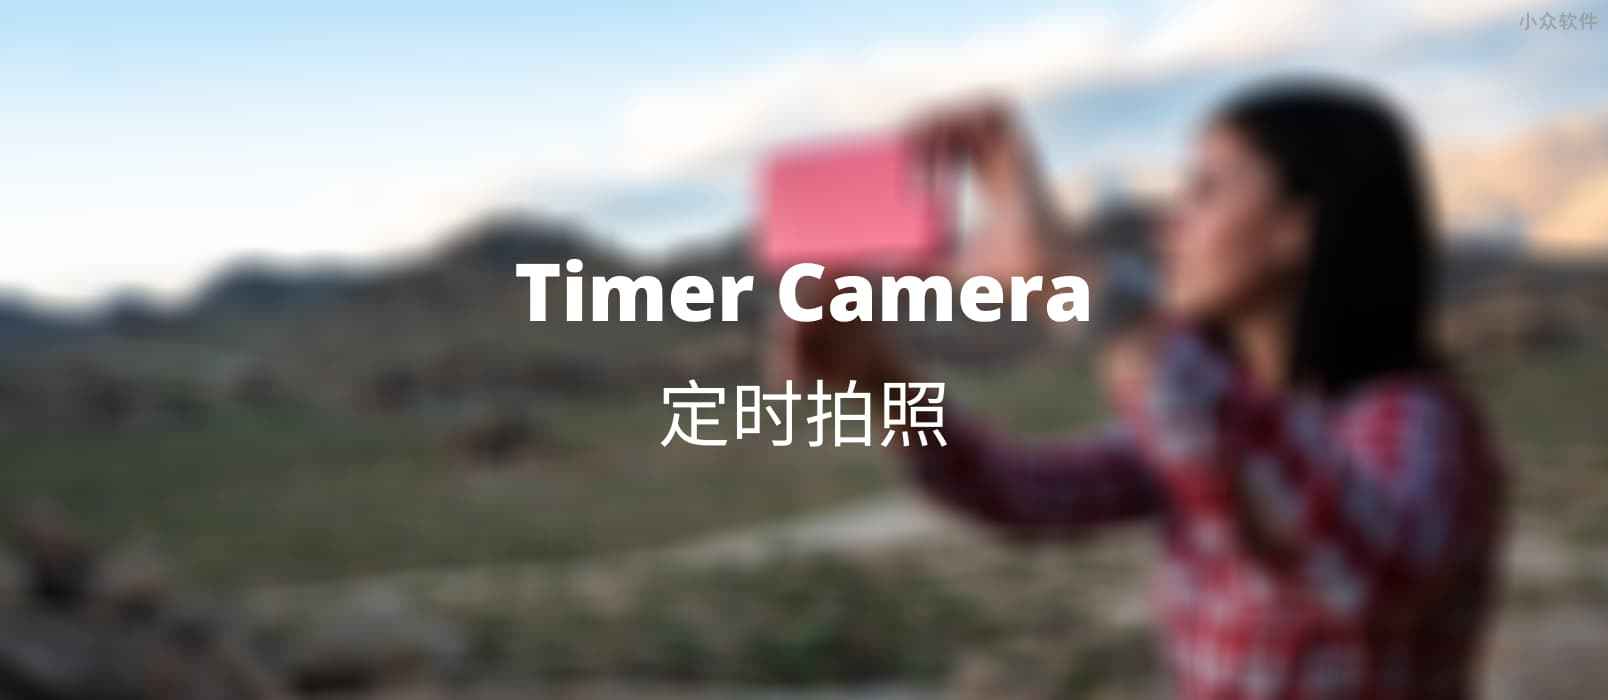 Timer Camera – 定时拍照应用[Android]